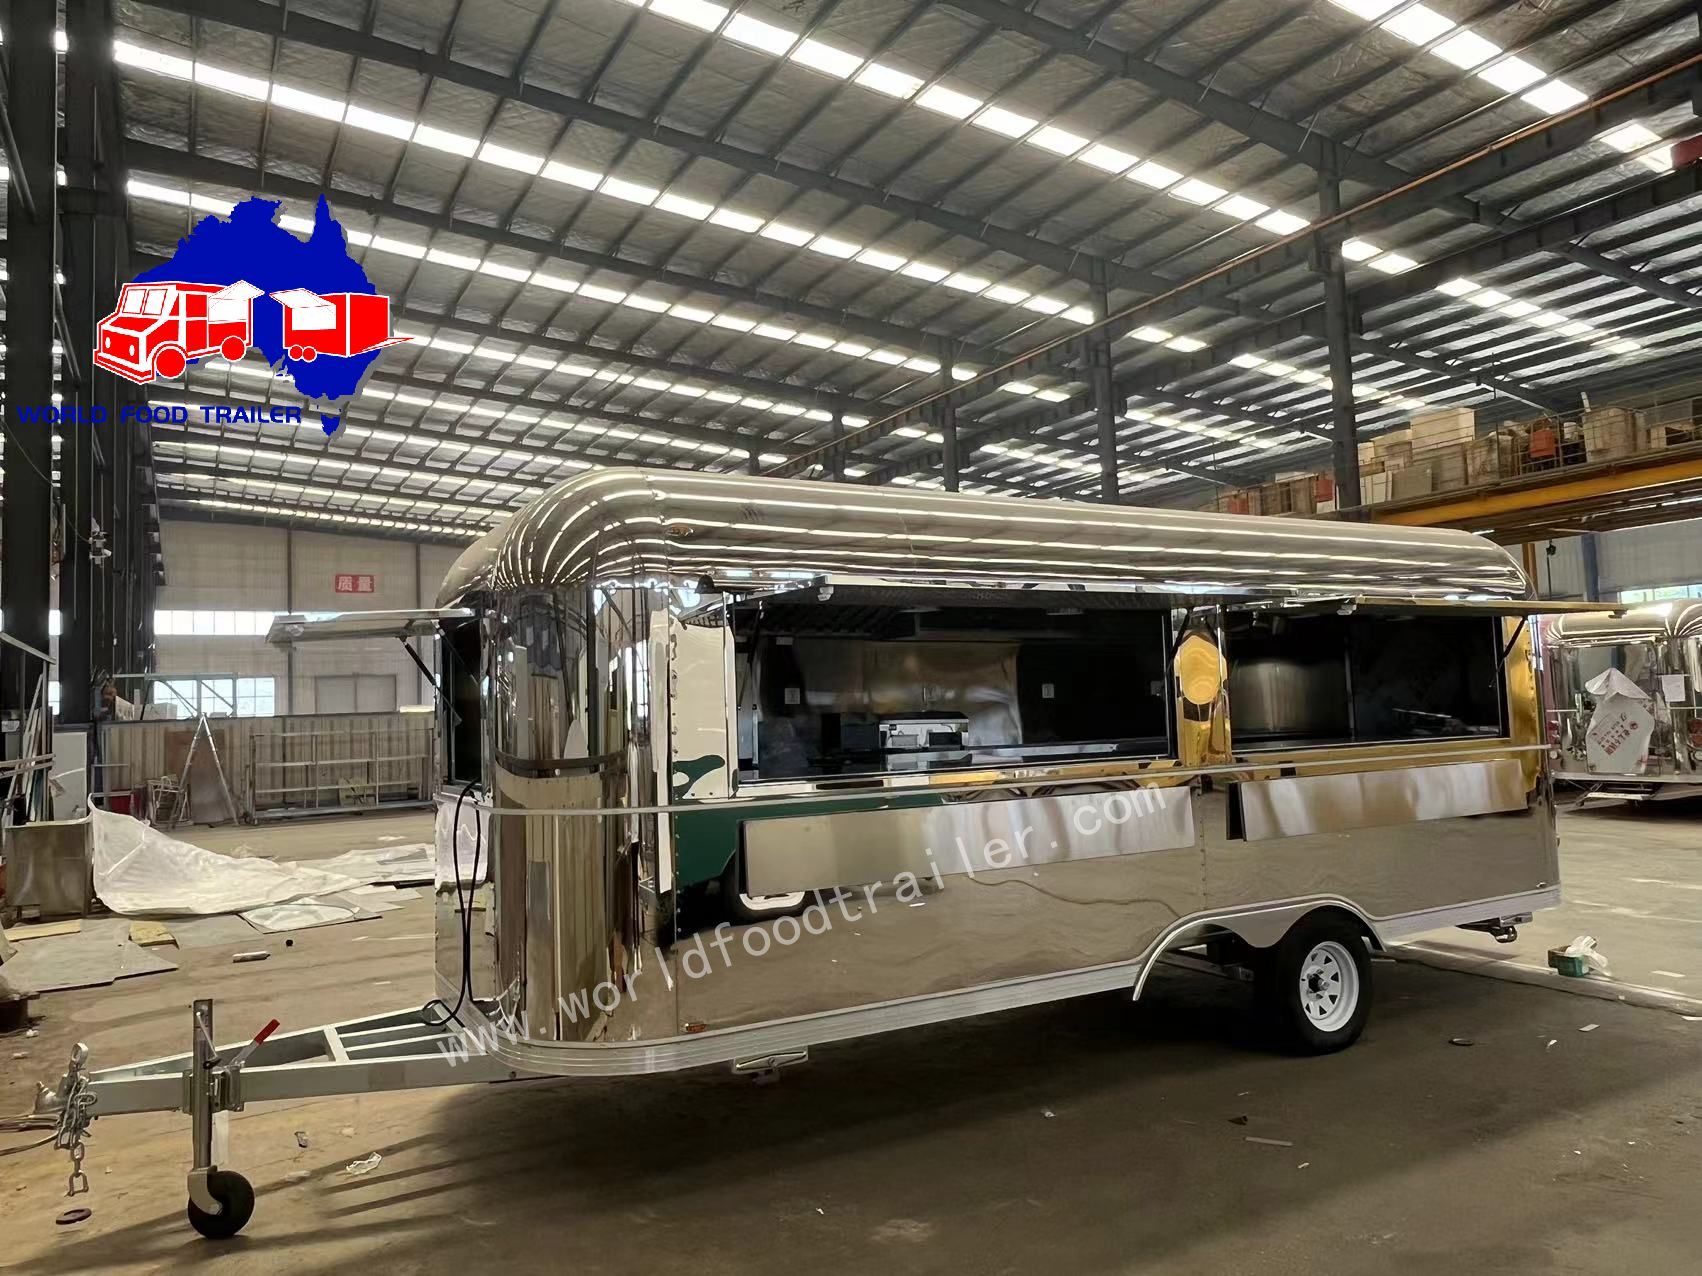 6M full mirror stainless steel airstream trailer for fast food business, luxury mobile coffee cart/ snack truck